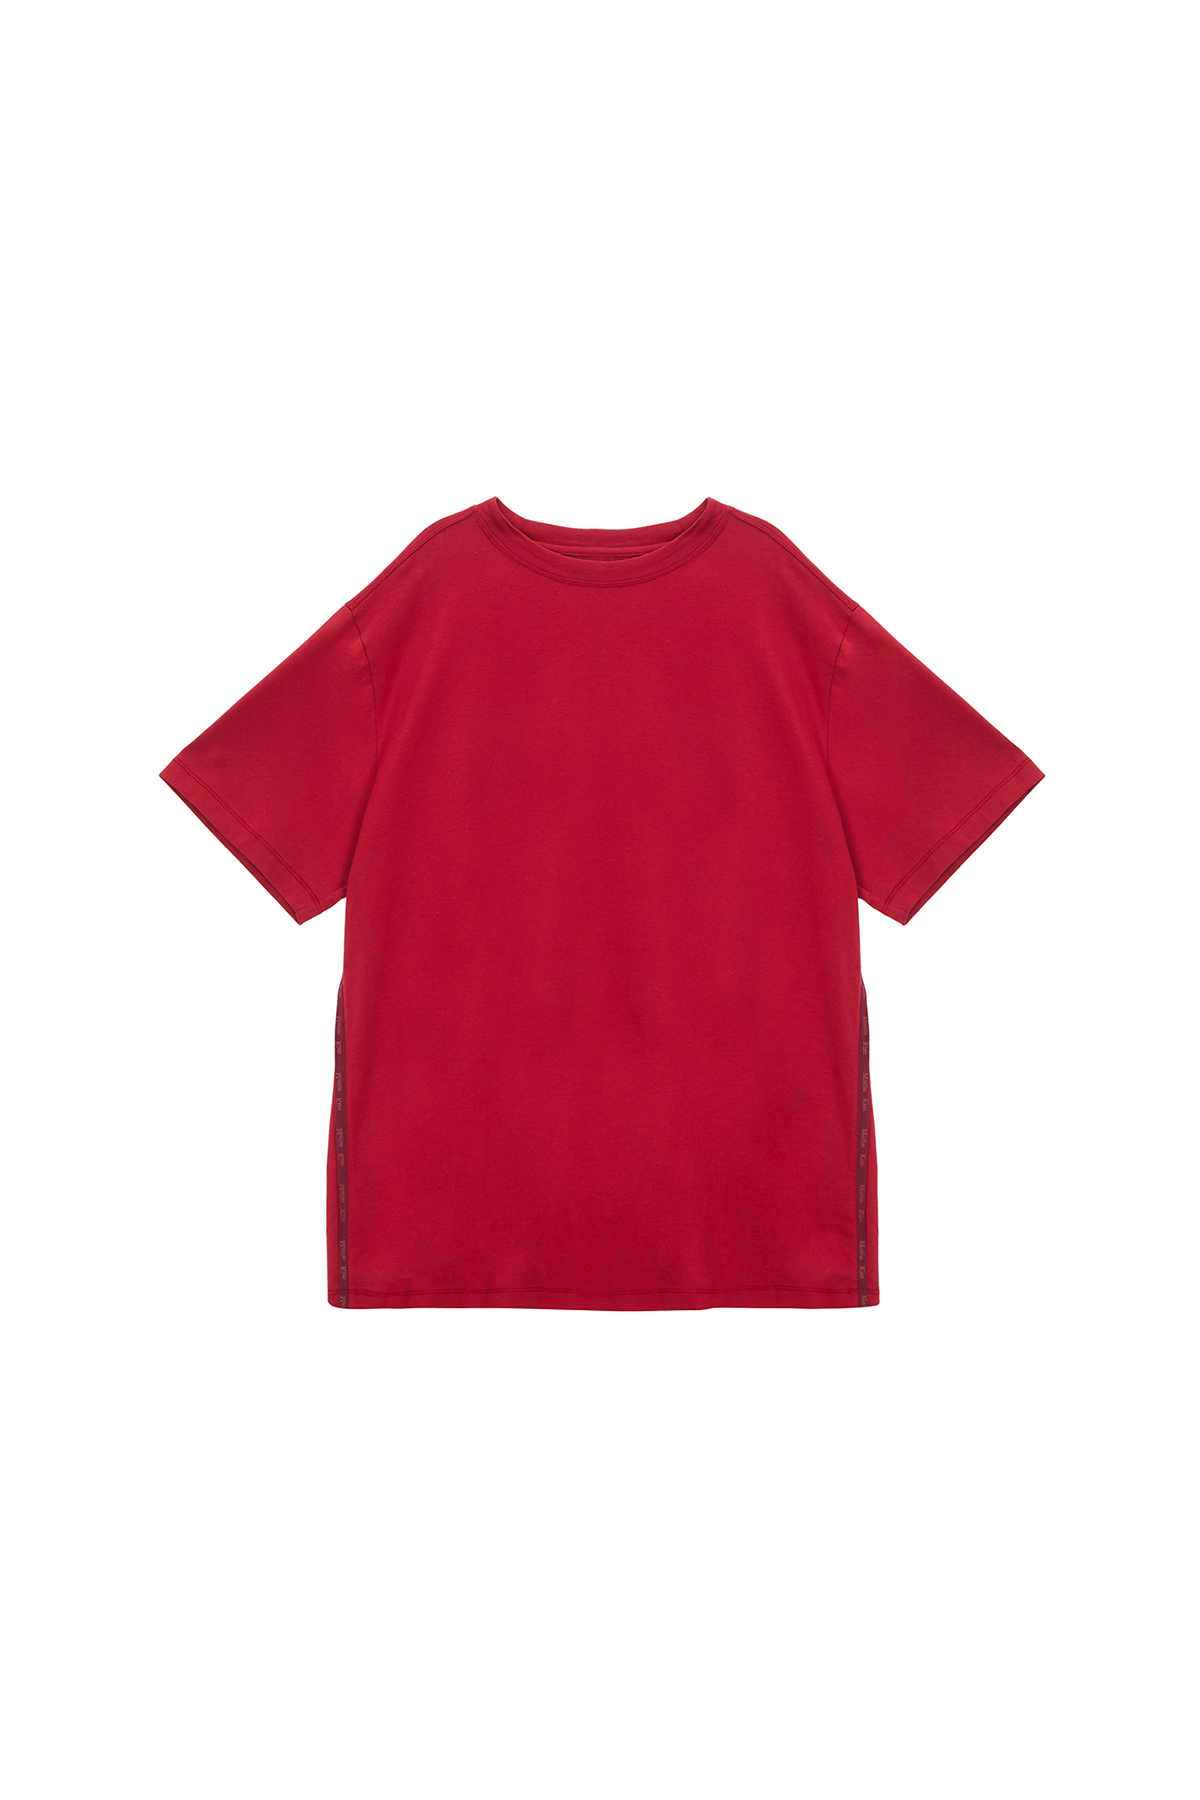 SIDE LOGO TAPING BOXY TOP IN RED